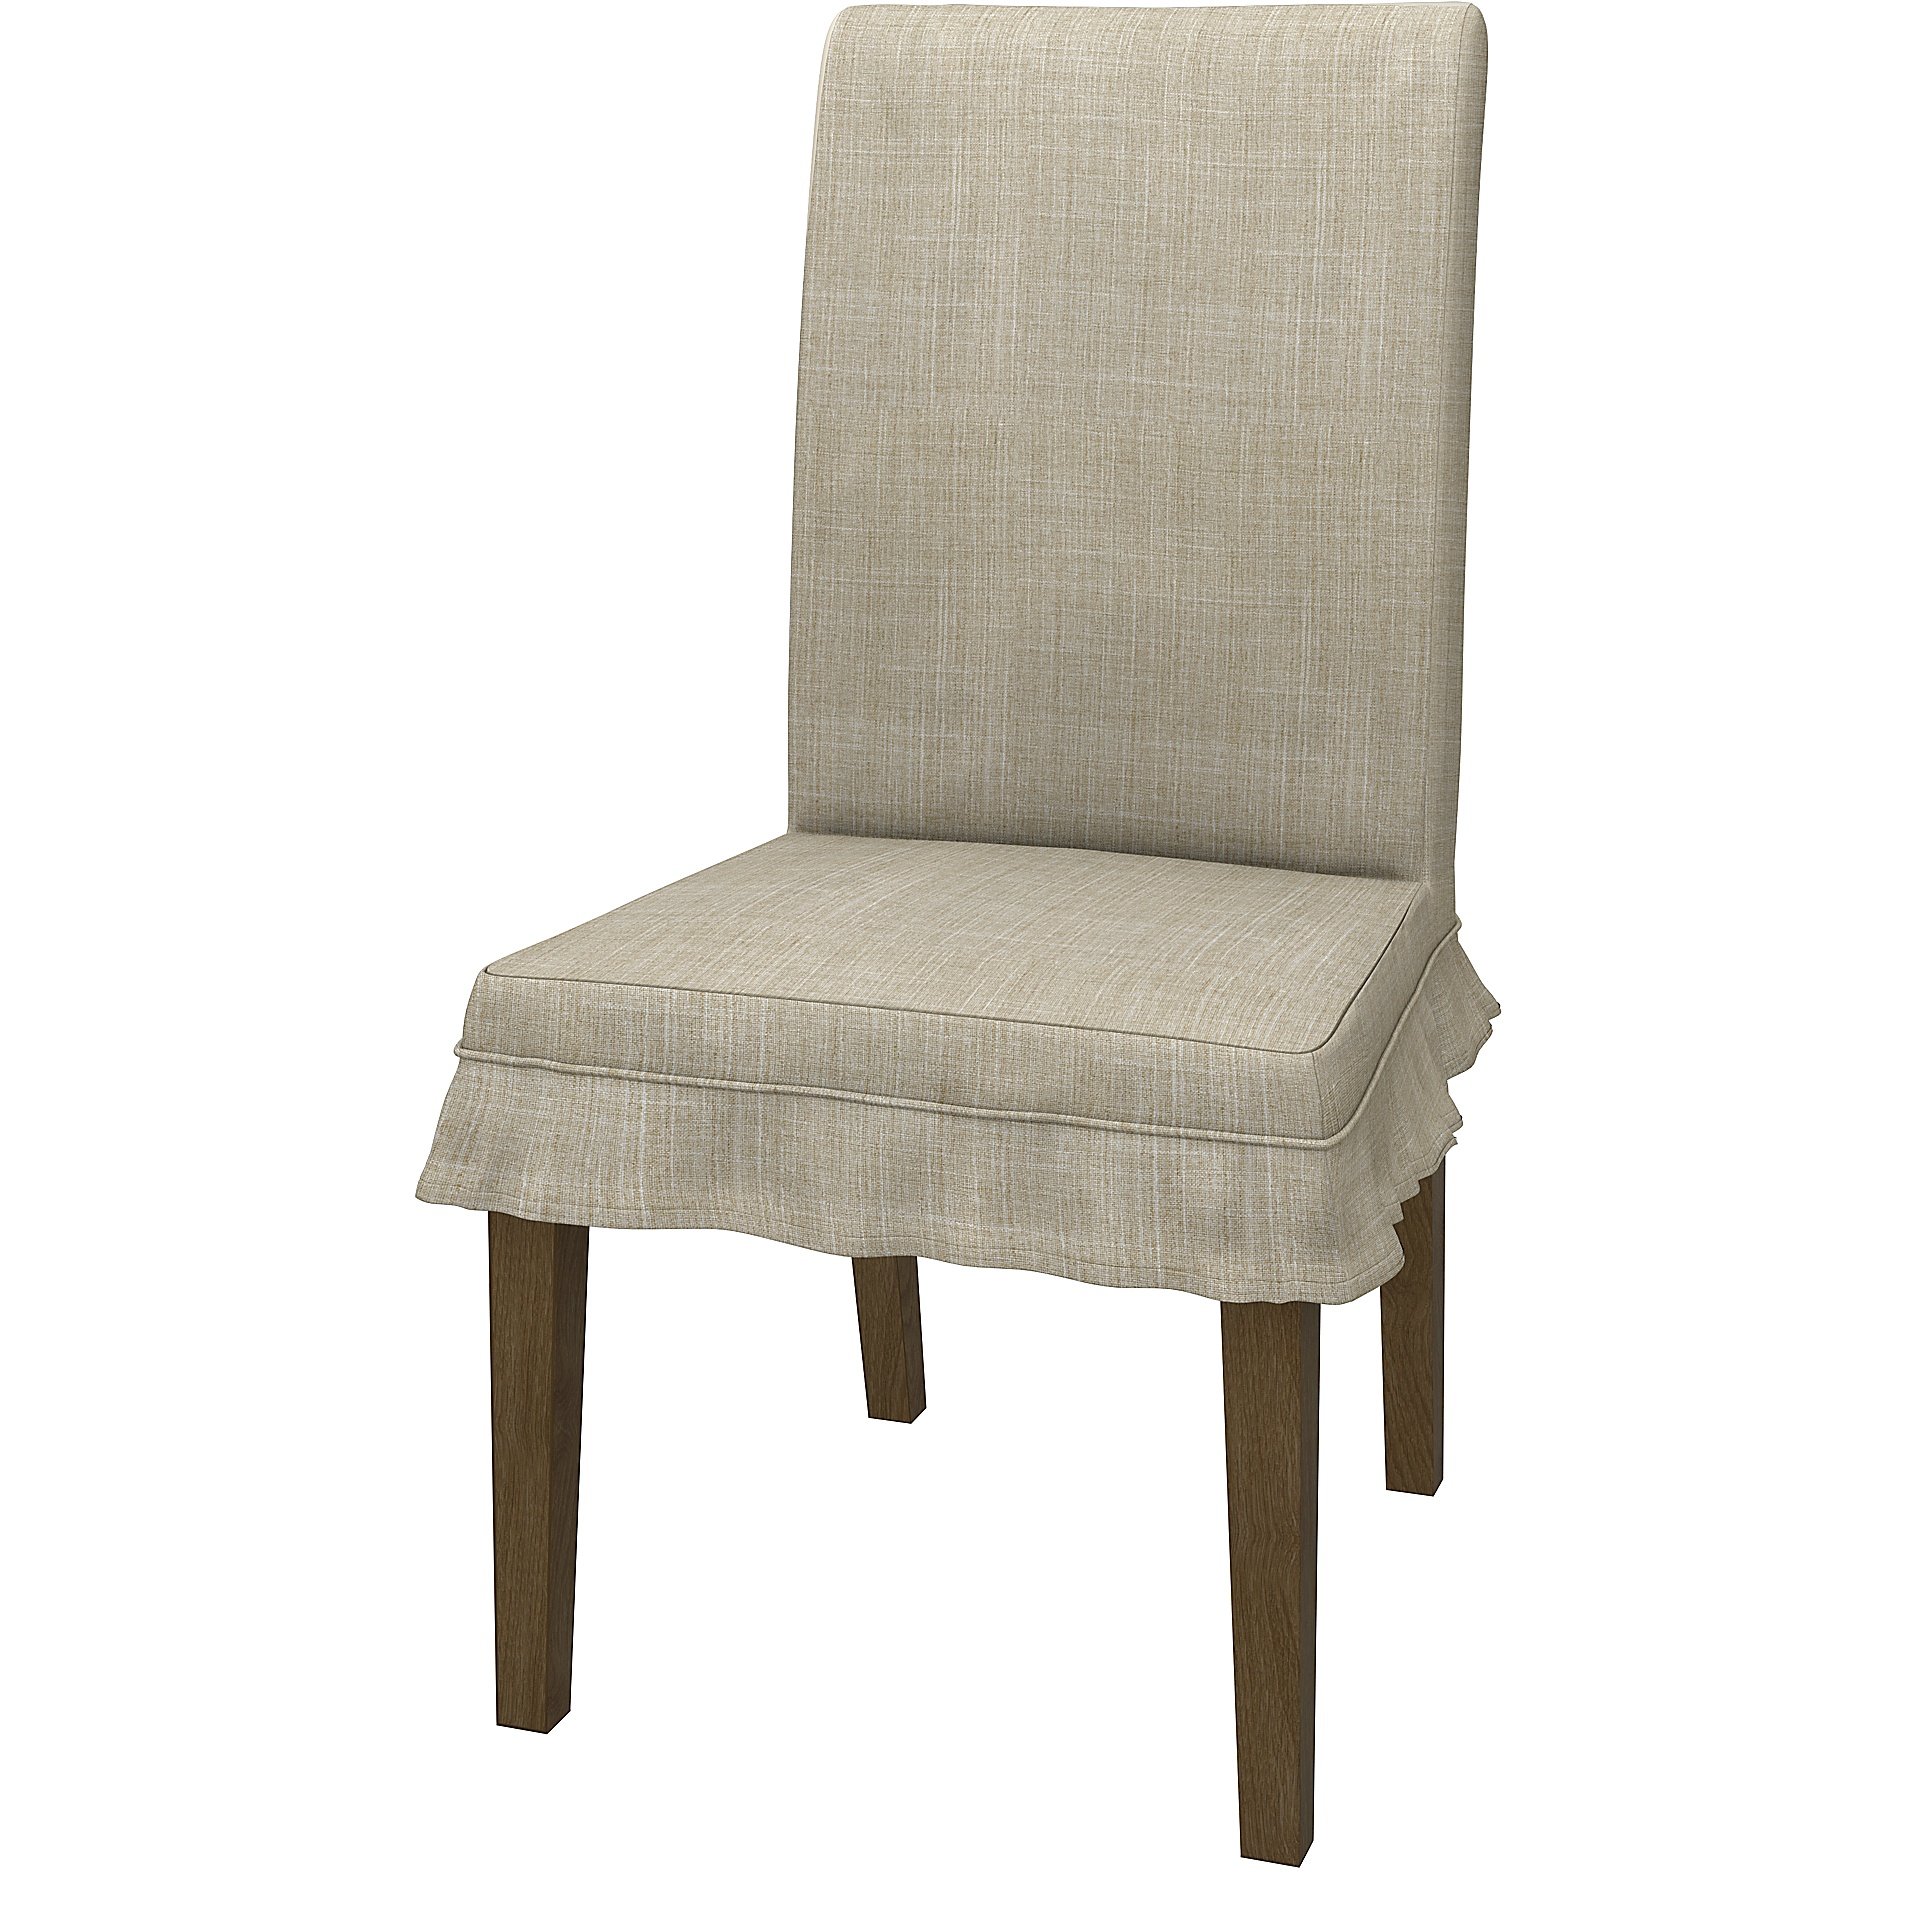 IKEA - HENRIKSDAL DINING CHAIR COVER SHORT SKIRT WITH RUFFLES (STANDARD MODEL), Sand Beige, Boucle &